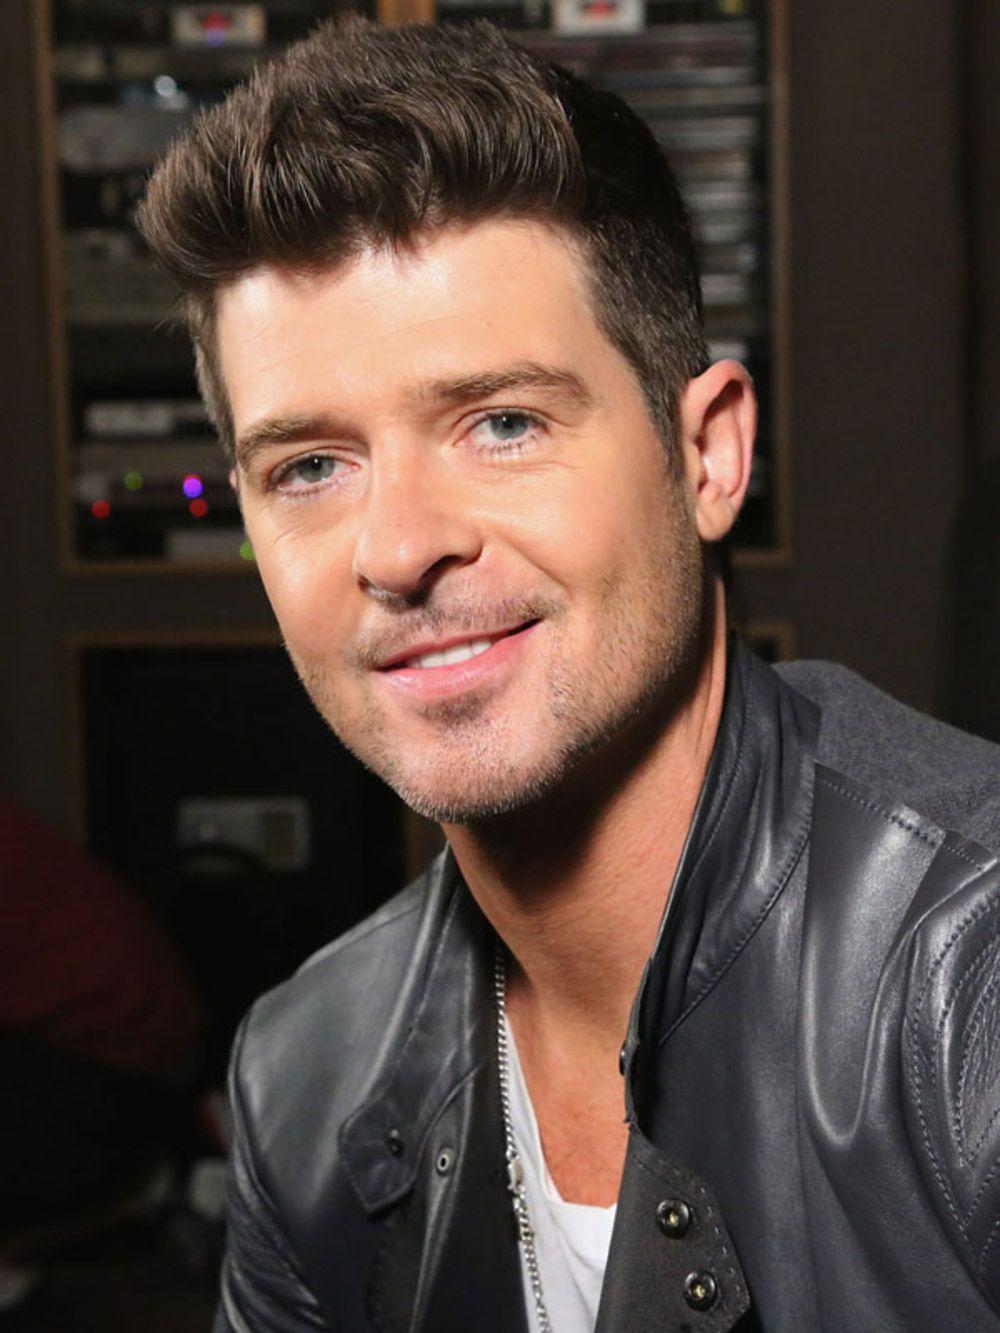 Awesome Robin Thicke HD Wallpaper Free Download